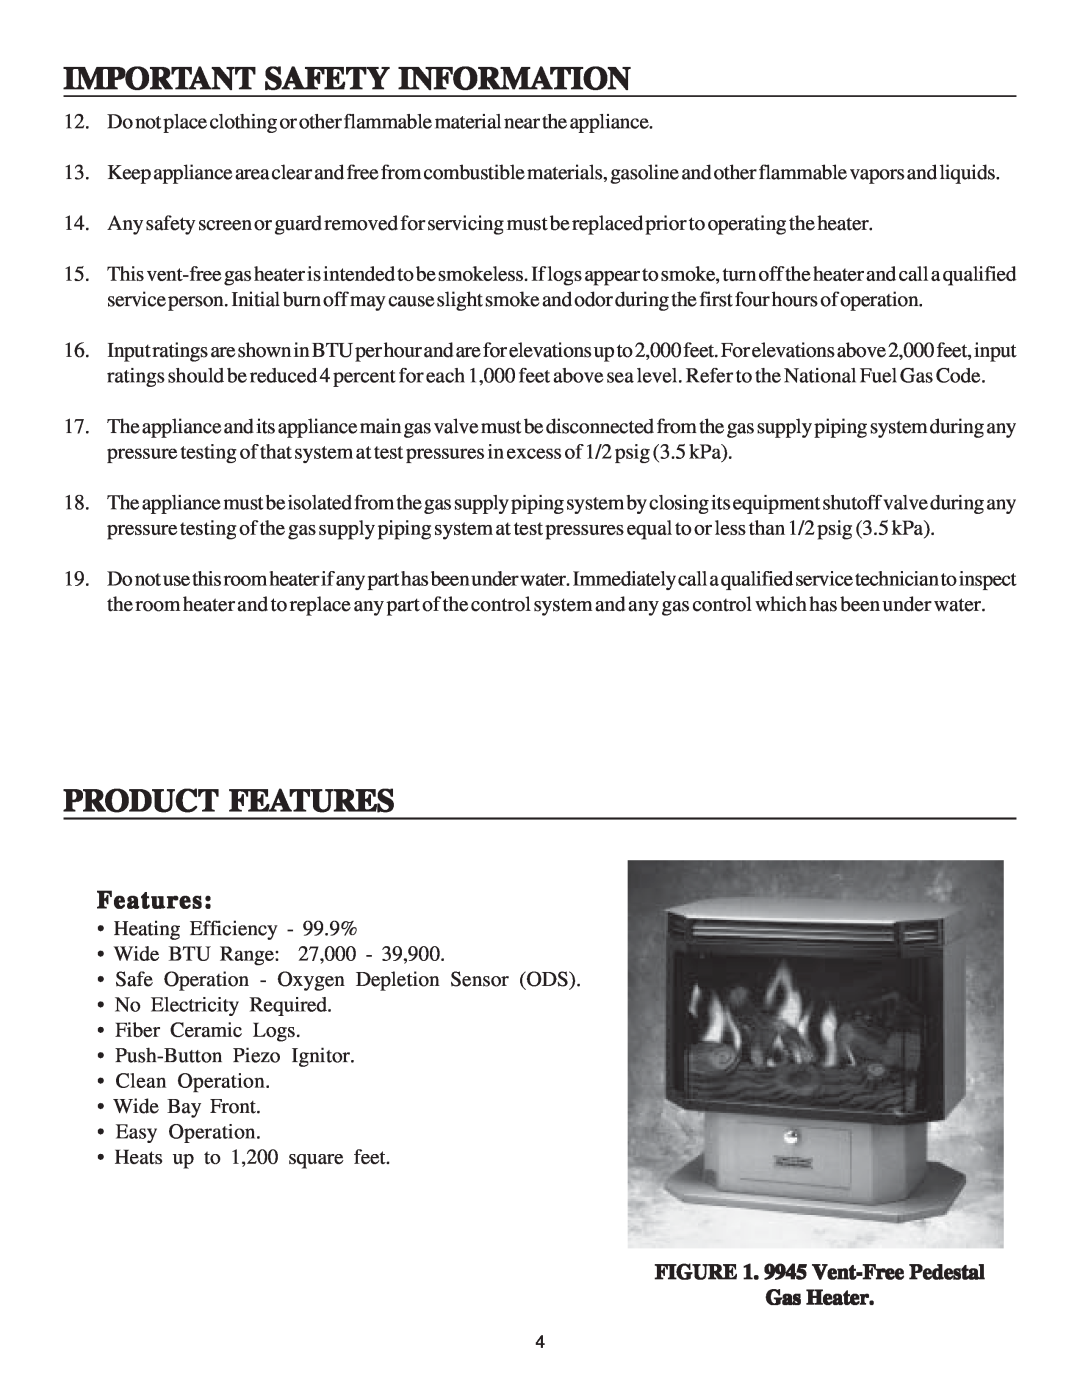 United States Stove B9945N manual Product Features, Important Safety Information, 9945 Vent-FreePedestal Gas Heater 